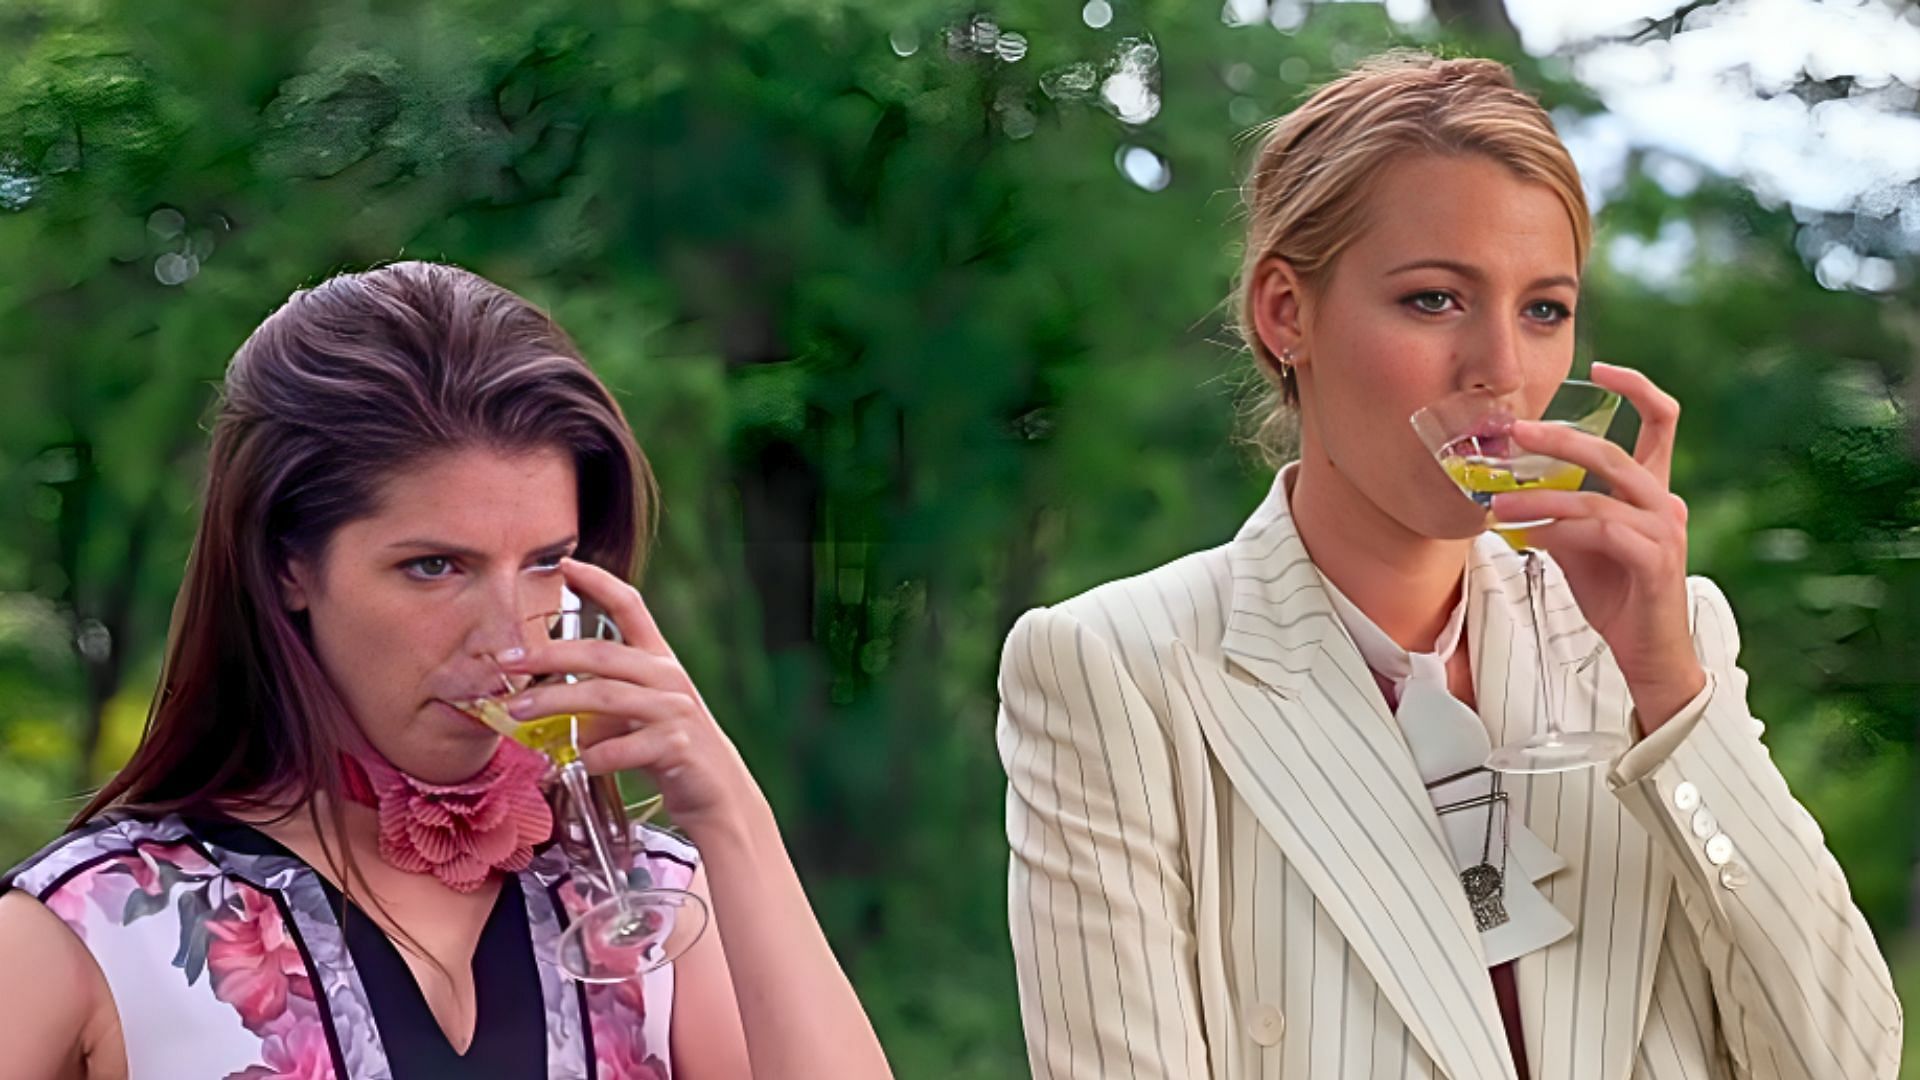 Anna Kendrick (left) and Blake Lively (right) will also star in A Simple Favor 2 (Image via Lionsgate)